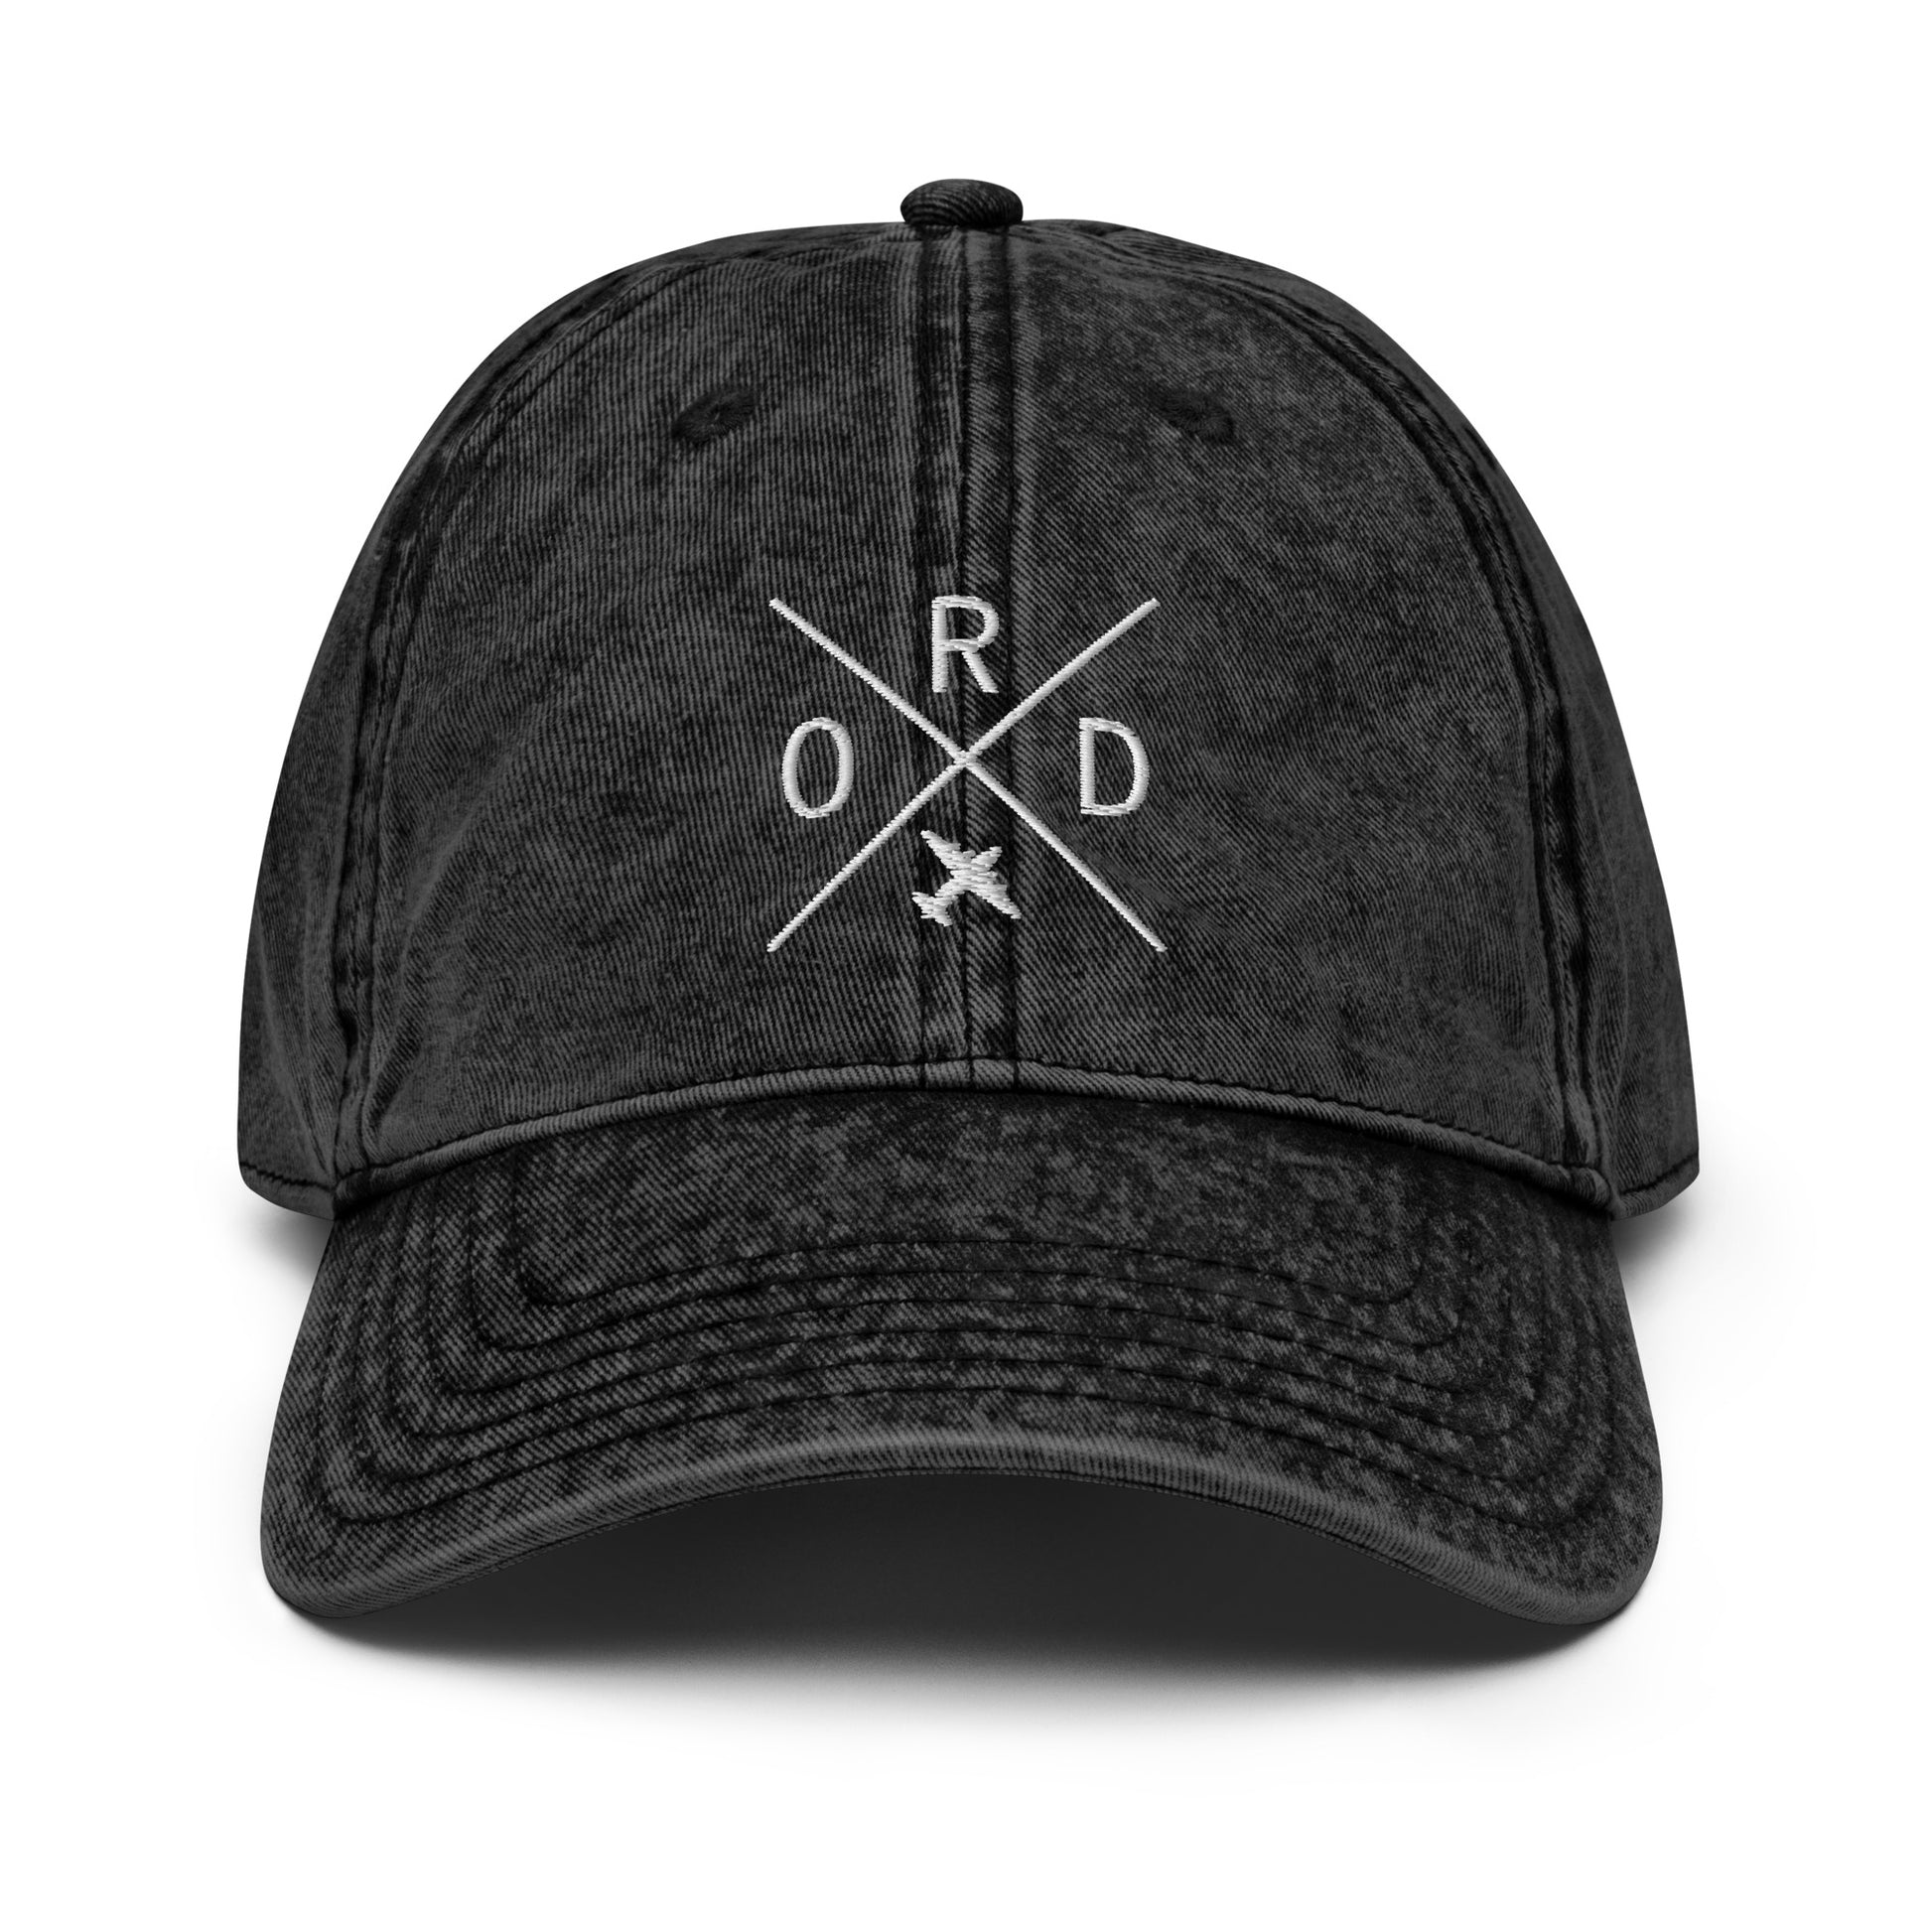 Crossed-X Cotton Twill Cap - White • ORD Chicago • YHM Designs - Image 16